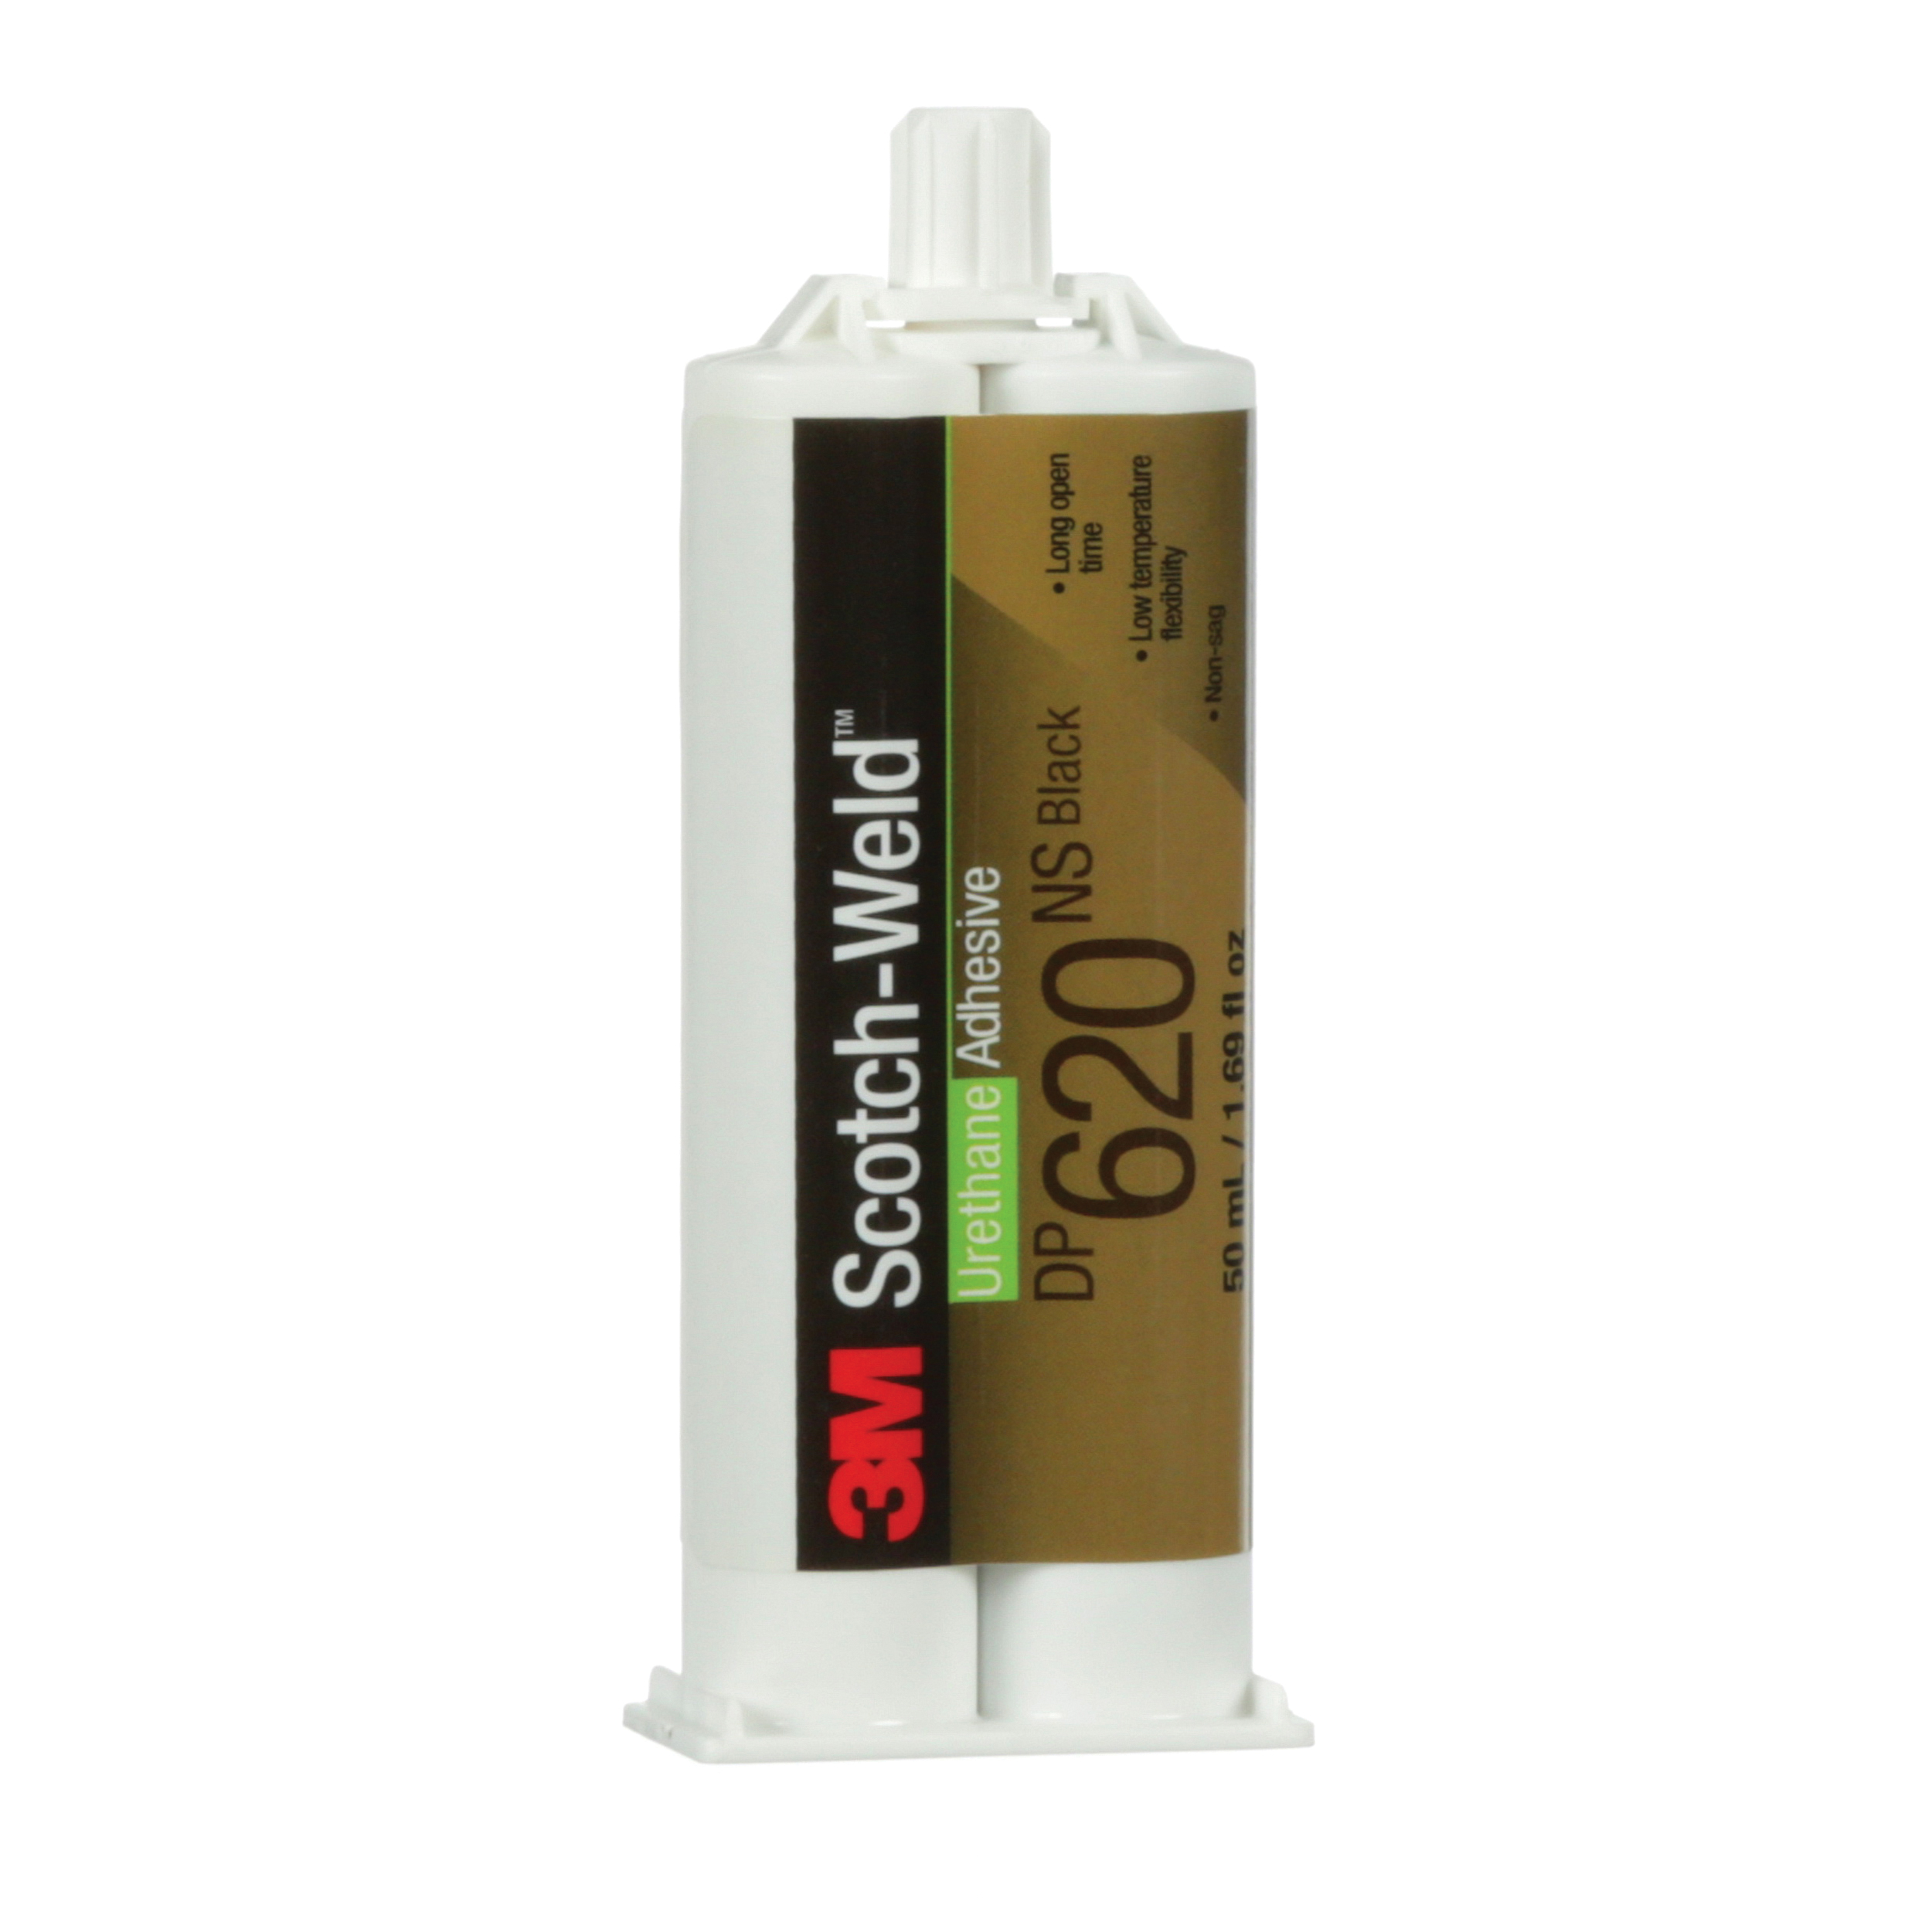 Scotch-Weld™ 021200-96407 2-Part Part Urethane Adhesive, 50 mL Duo-Pak Syringe, Part A: Opaque/Part B: Gray, 1 hr at 72 deg F Curing